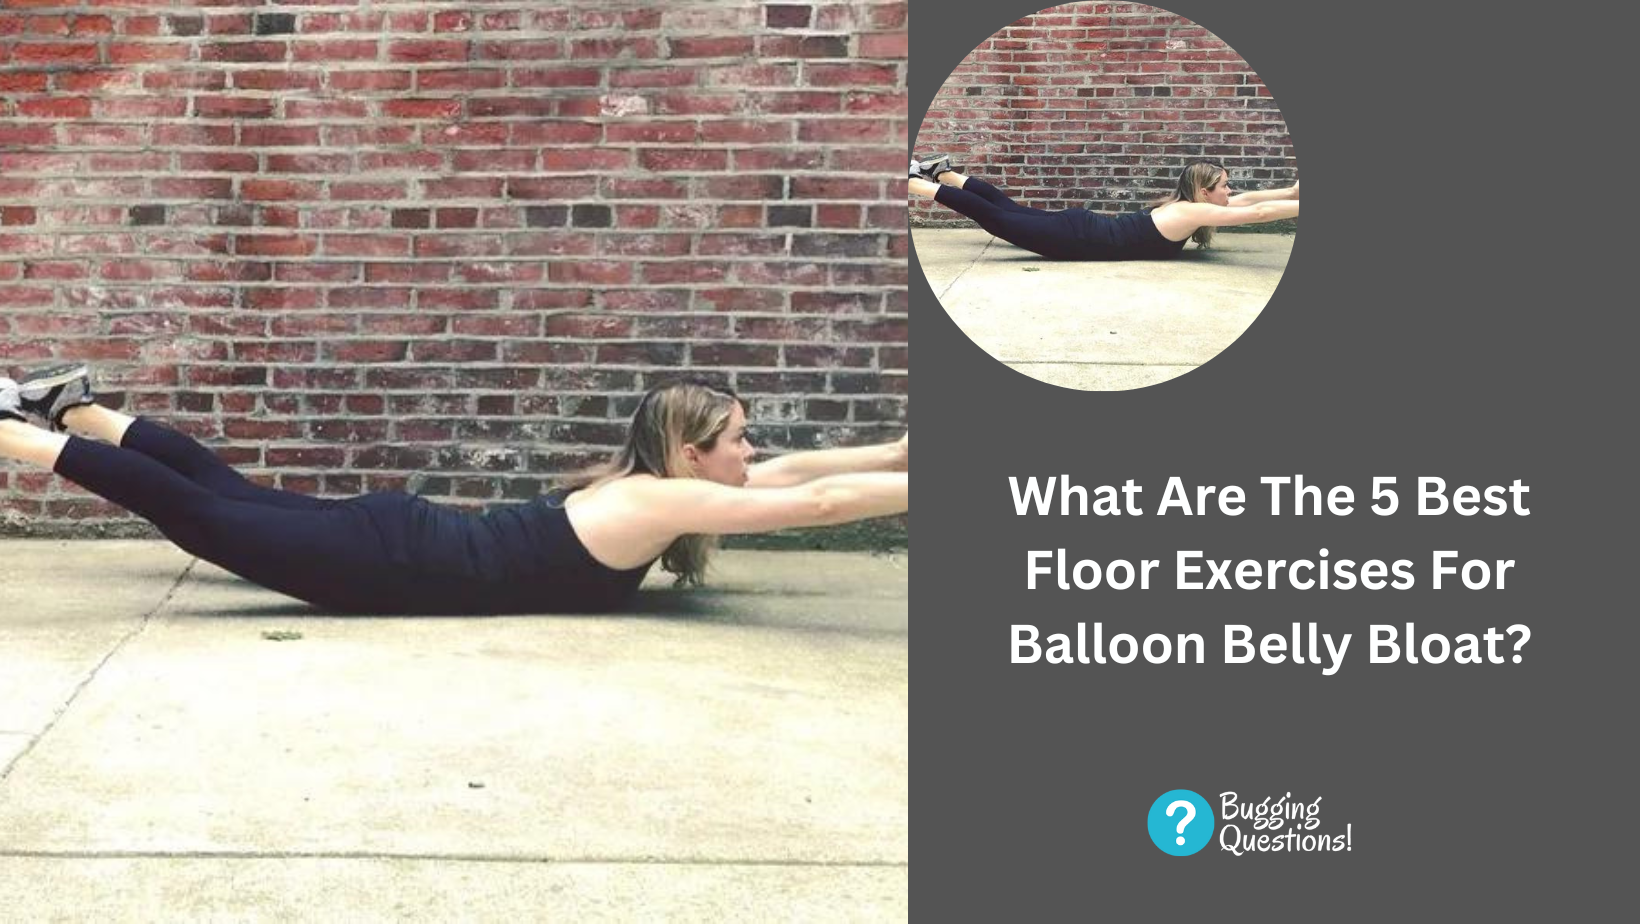 What Are The 5 Best Floor Exercises For Balloon Belly Bloat?